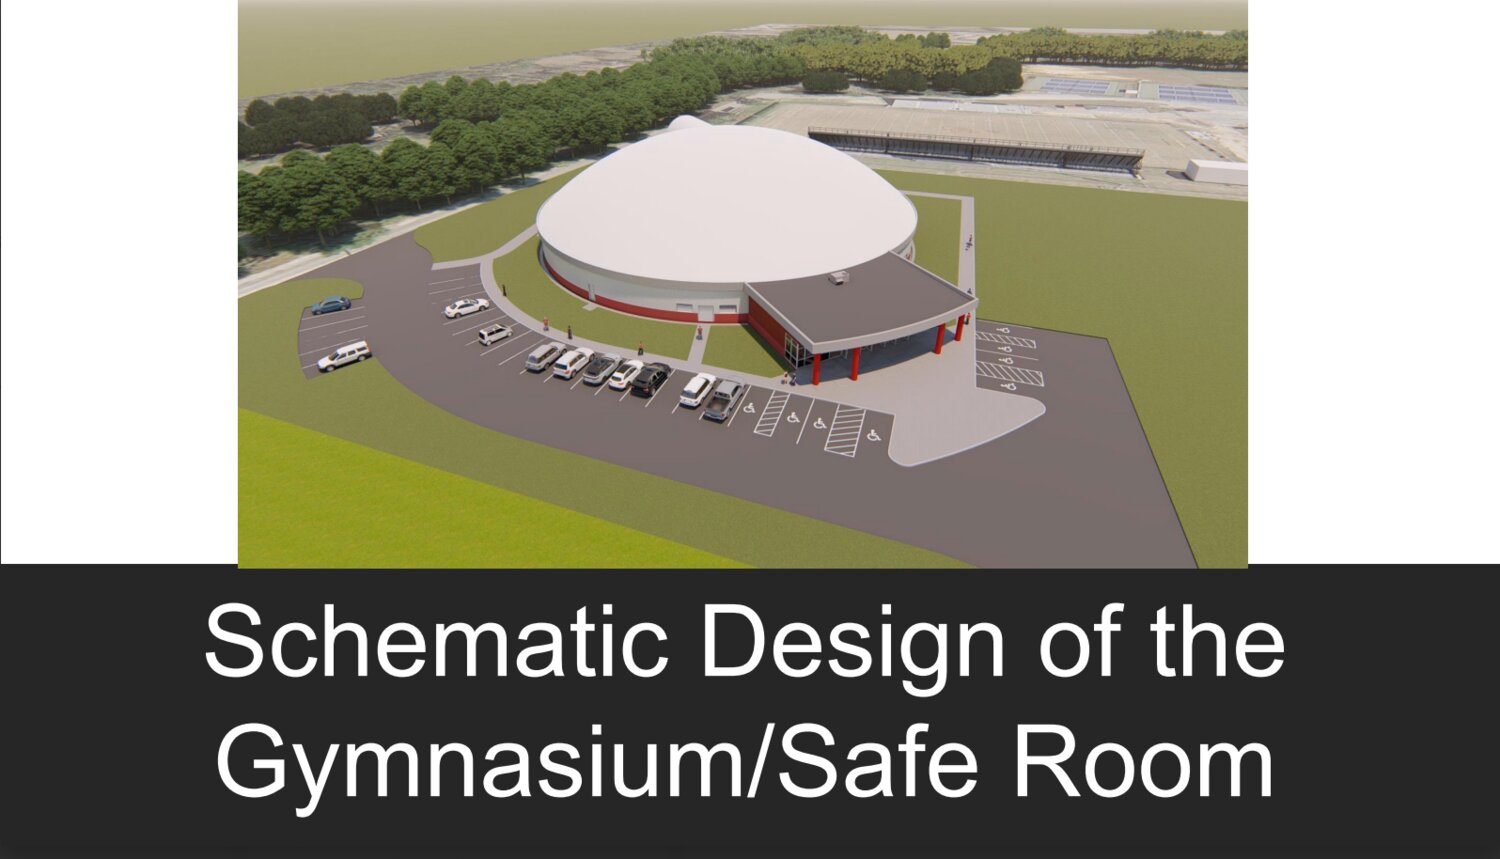 This is a rendering of the potential FEMA Gym/Safe house approved to be located on the Barnwell High School campus. This project was started years prior by Barnwell School District 45.